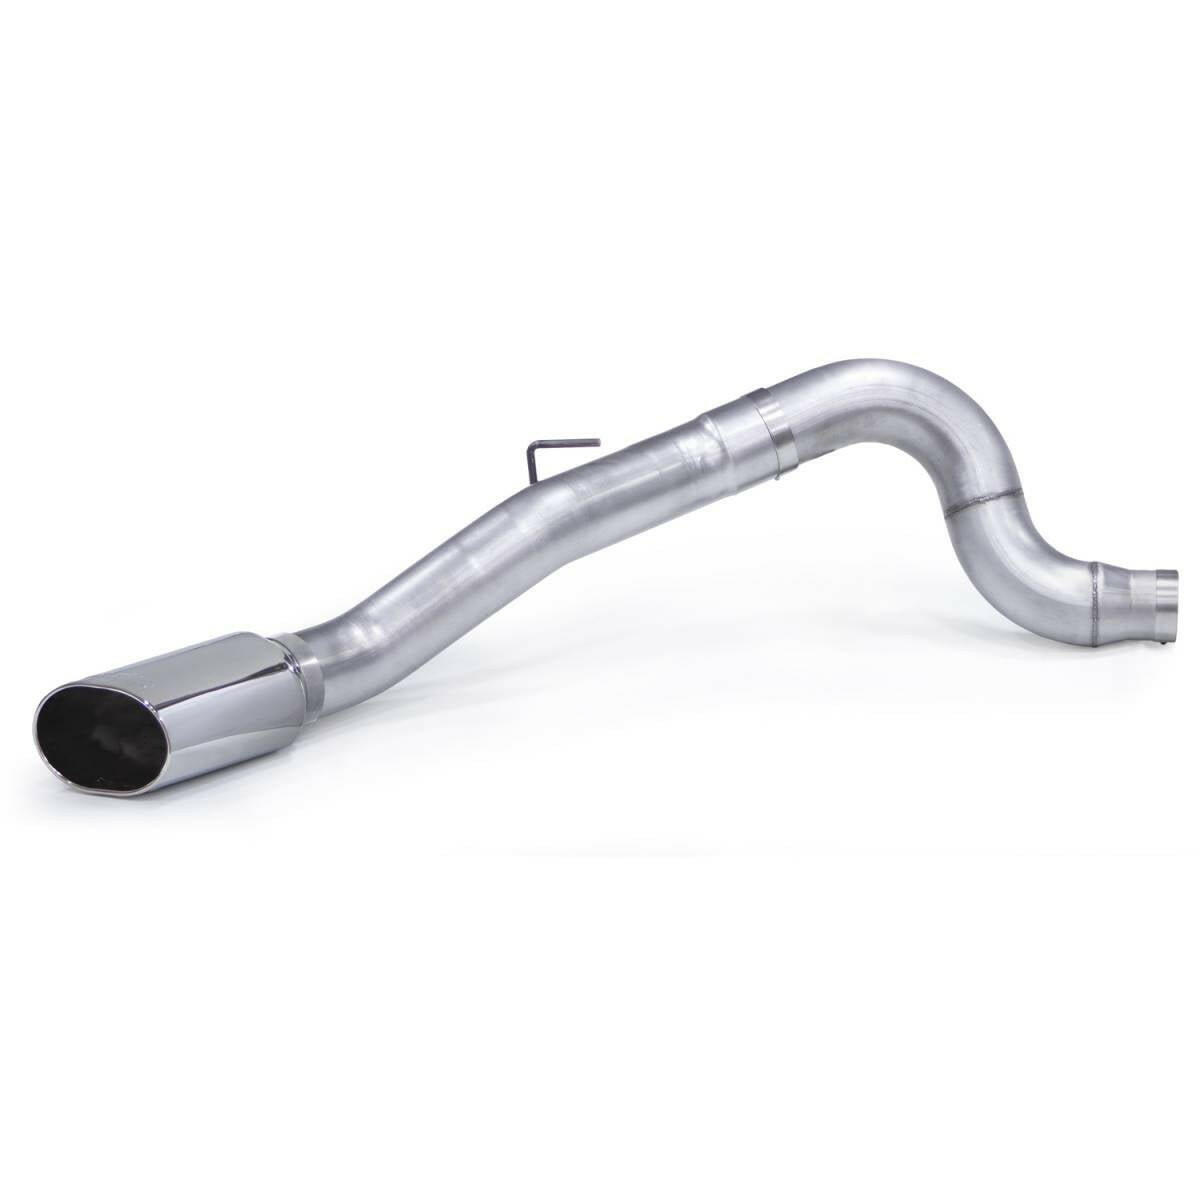 Banks Power Monster Exhaust System 5-inch Single S/S-Chrome Tip CCSB for 13-18 Ram 2500/3500 Cummins 6.7L Banks Power.